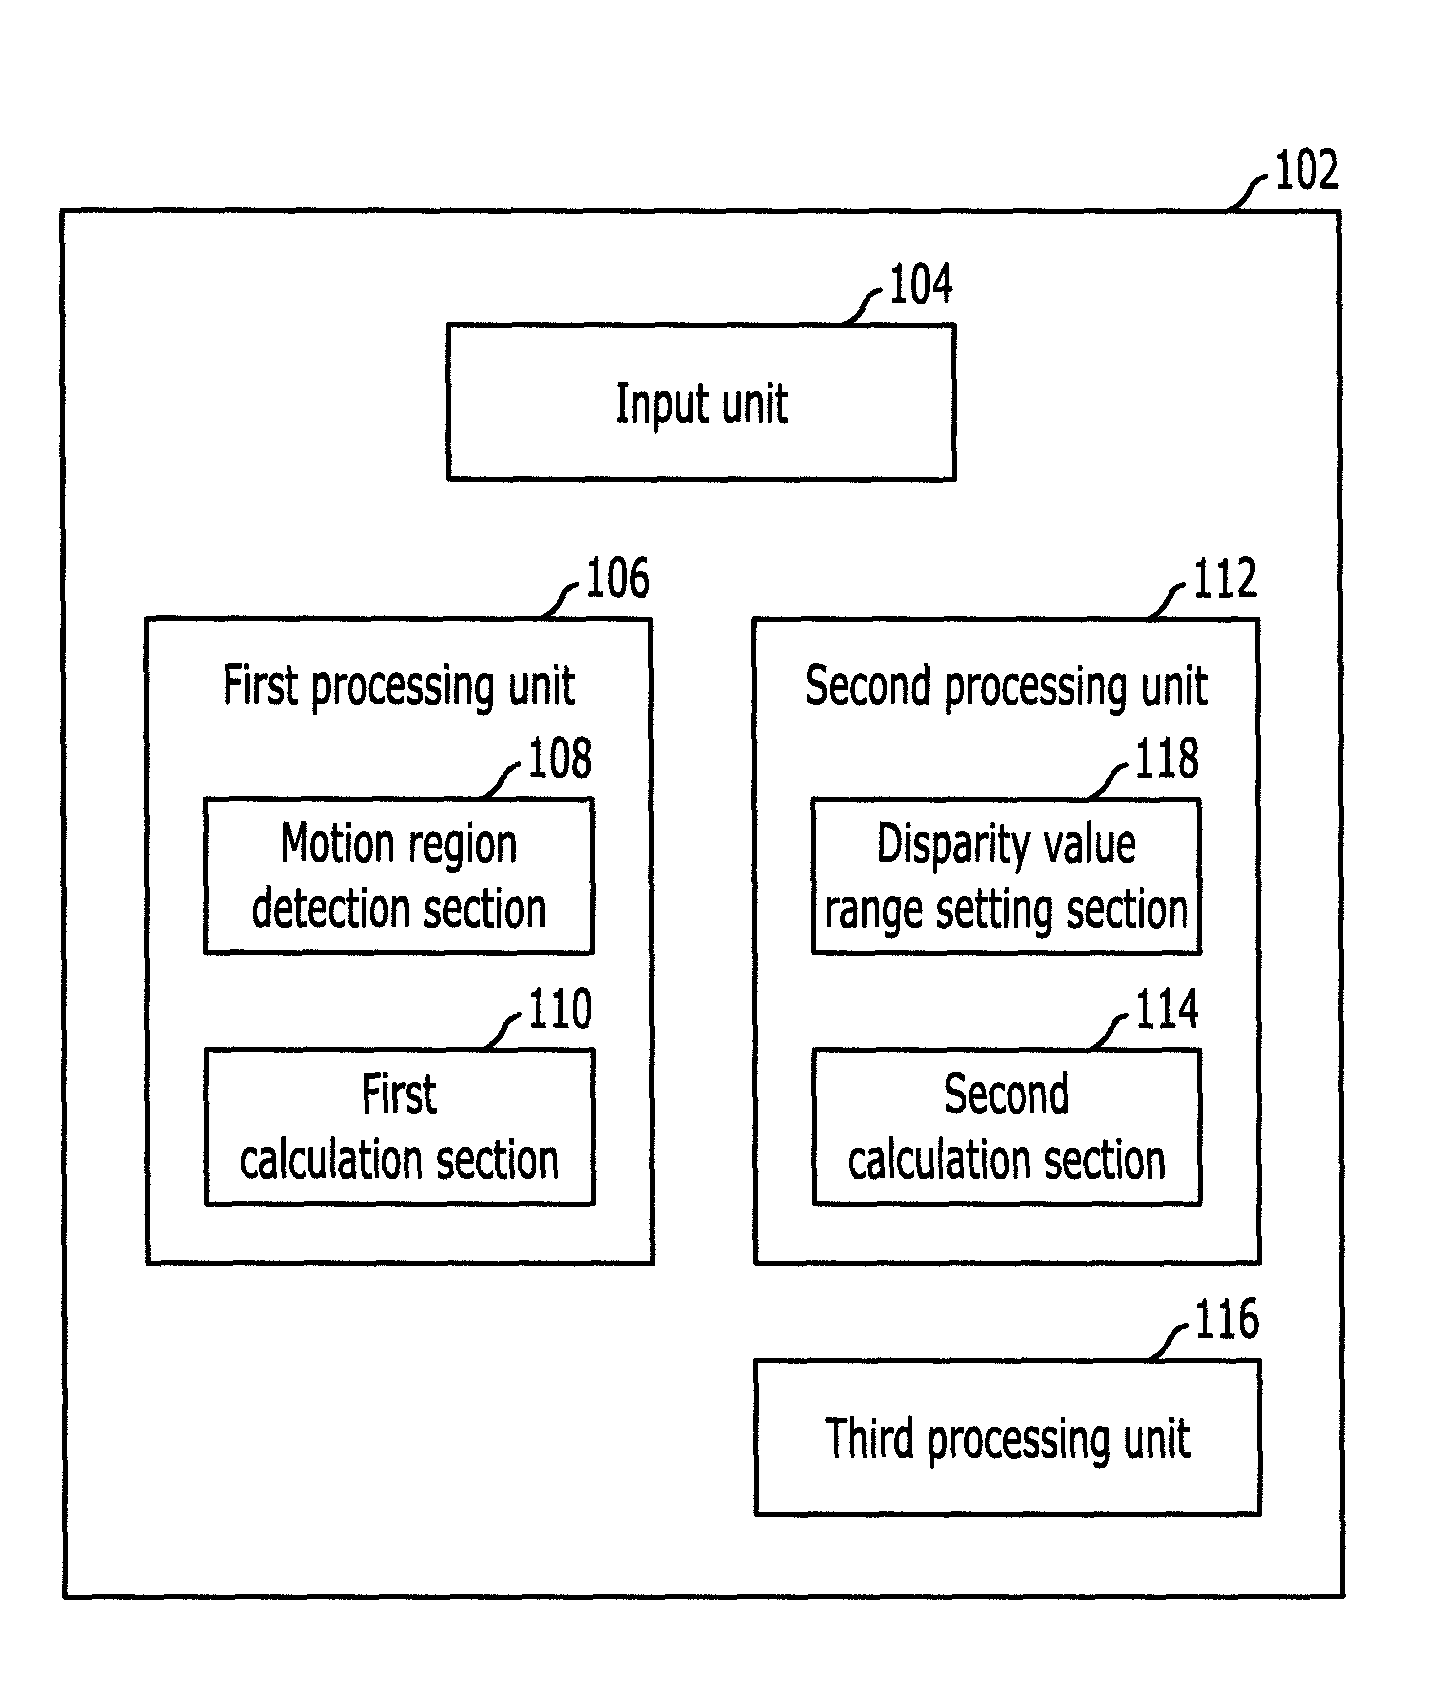 Method and apparatus for improving quality of depth image